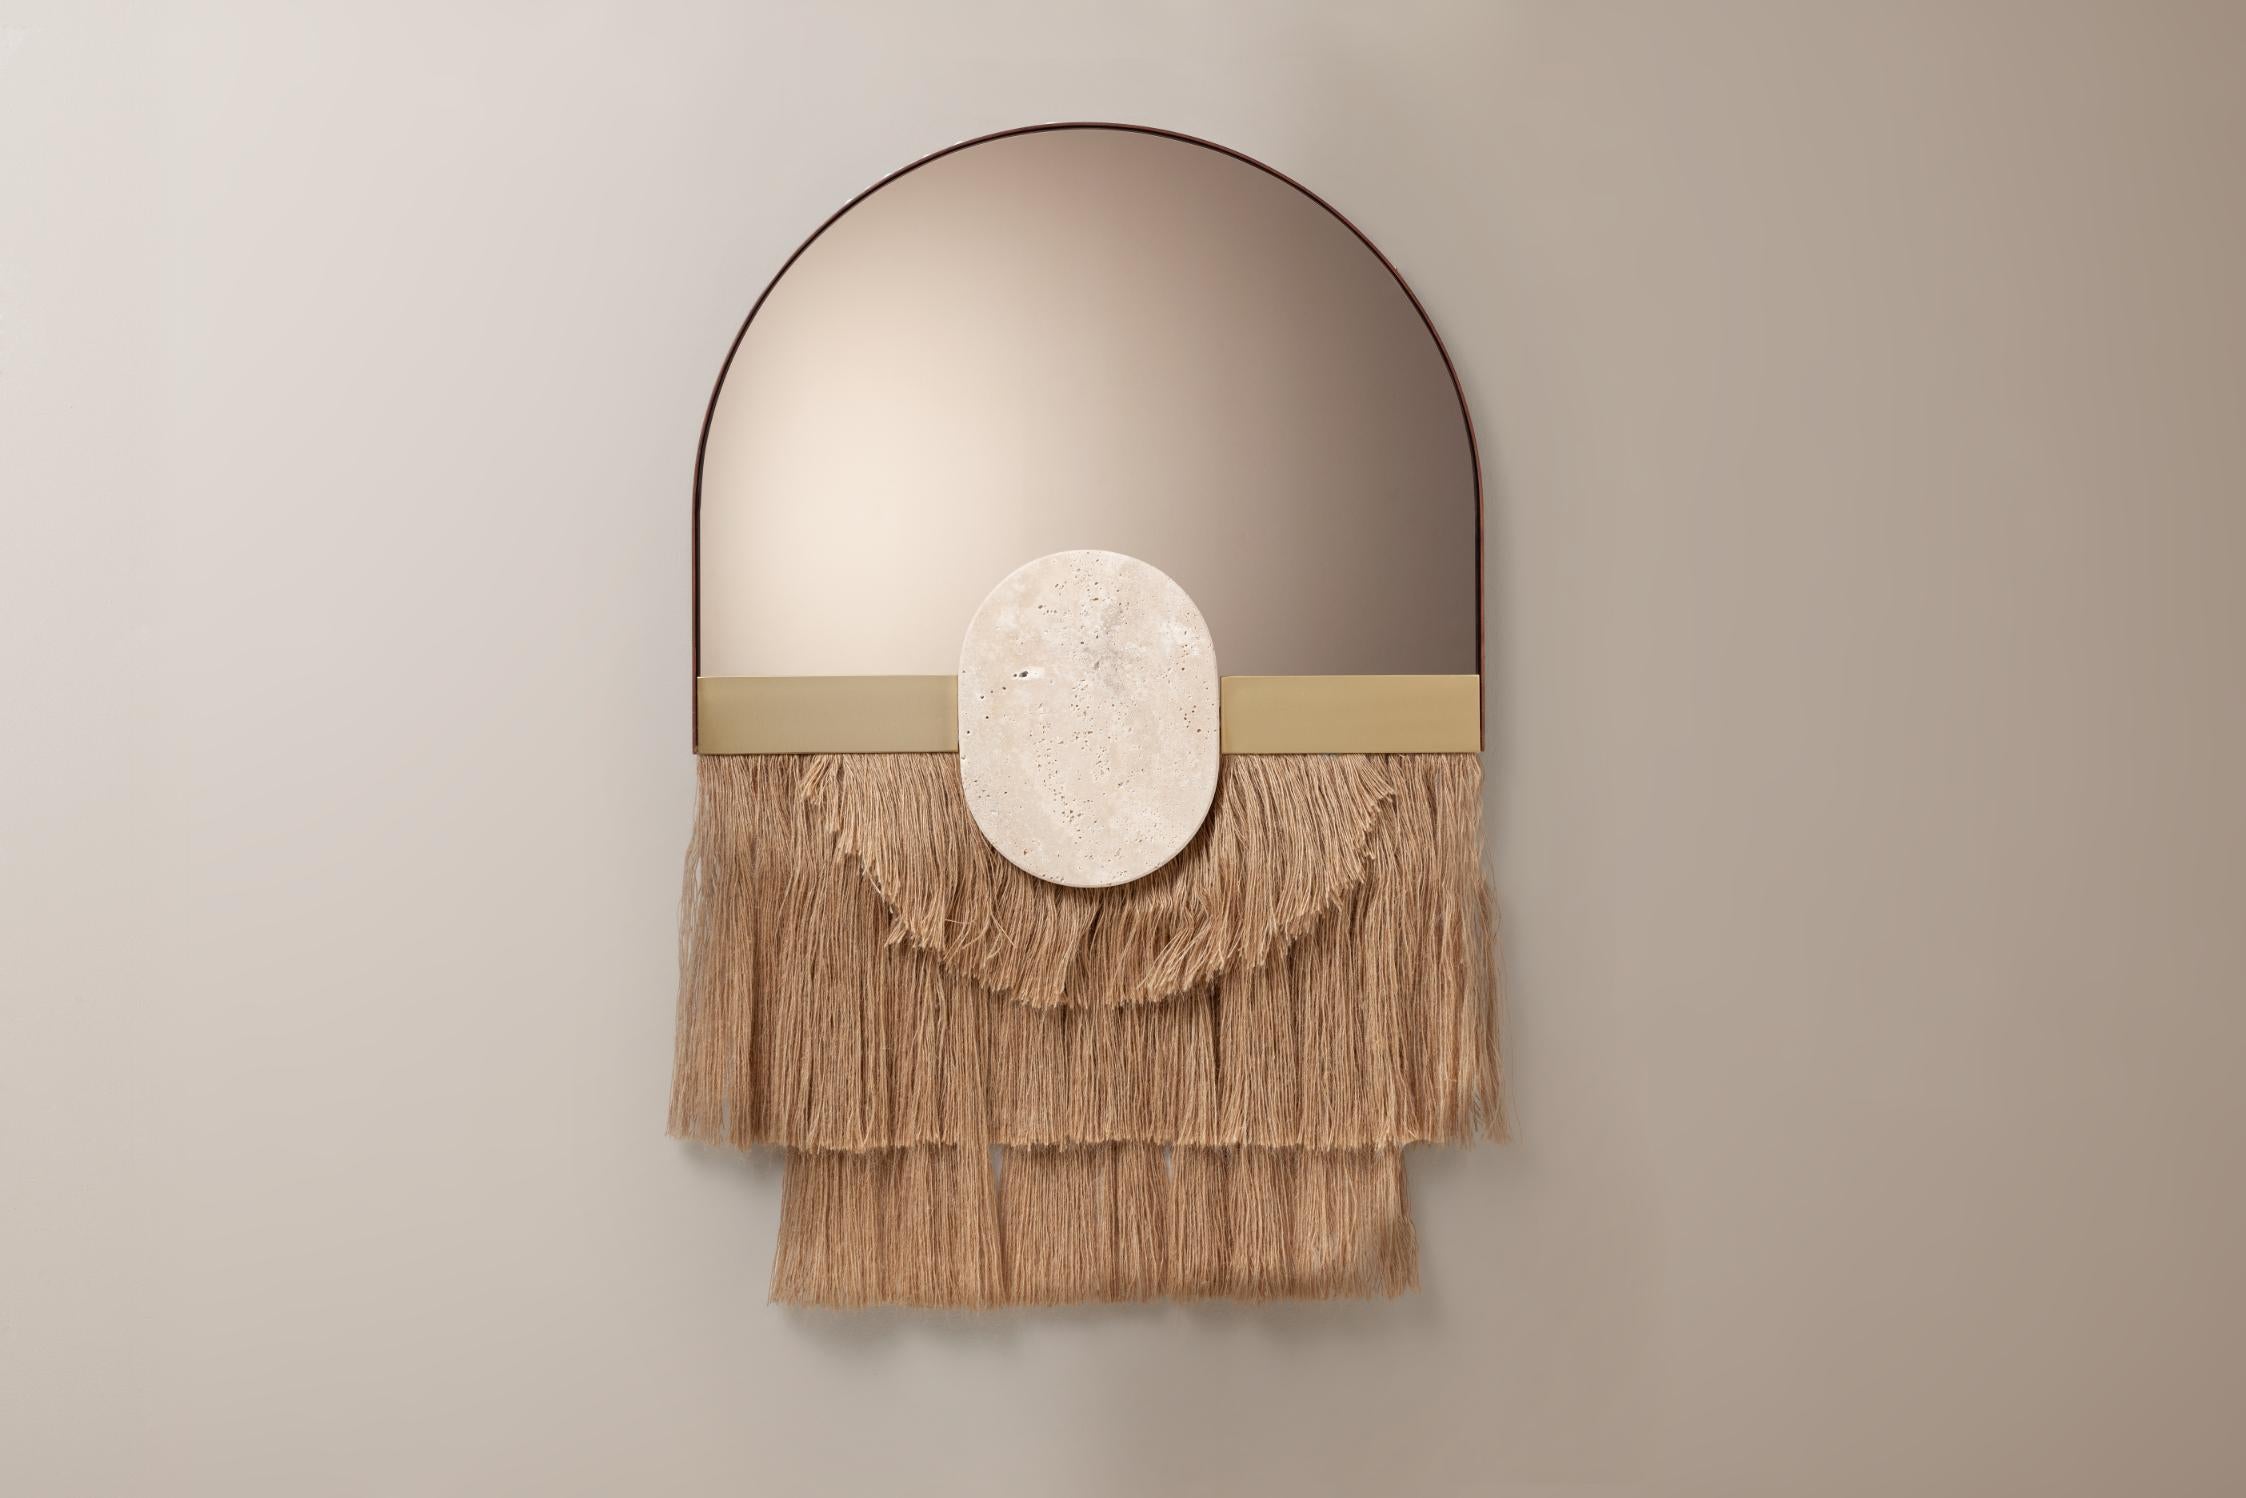 Soul ecru Llinen mirror by Dooq.
Dimensions: ø 30 x H 40 cm
Materials: Glass, marble.

Created by the perfect combination of color, energy and shape, Souk mirrors reflect the influences of overwhelming and visually fascinating Souk markets in